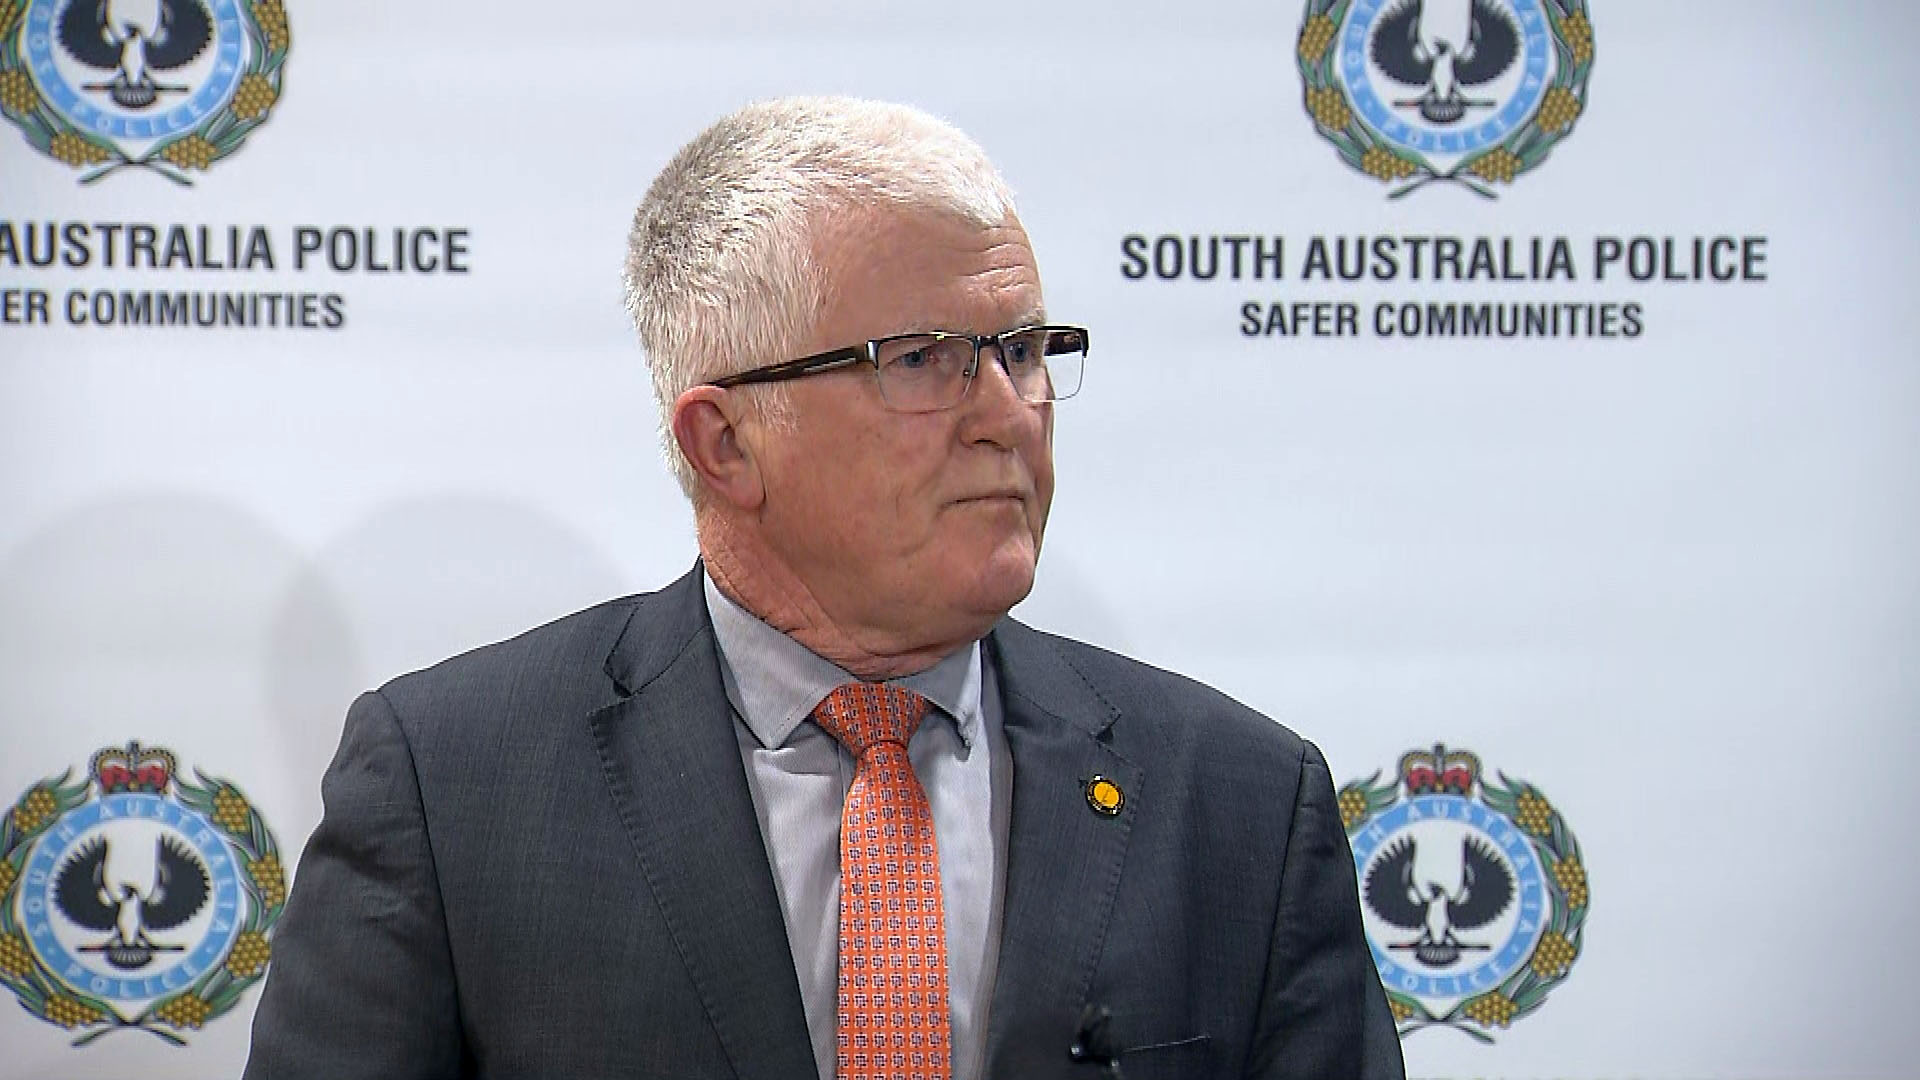 Detective Superintendent Des Bray from SA Police